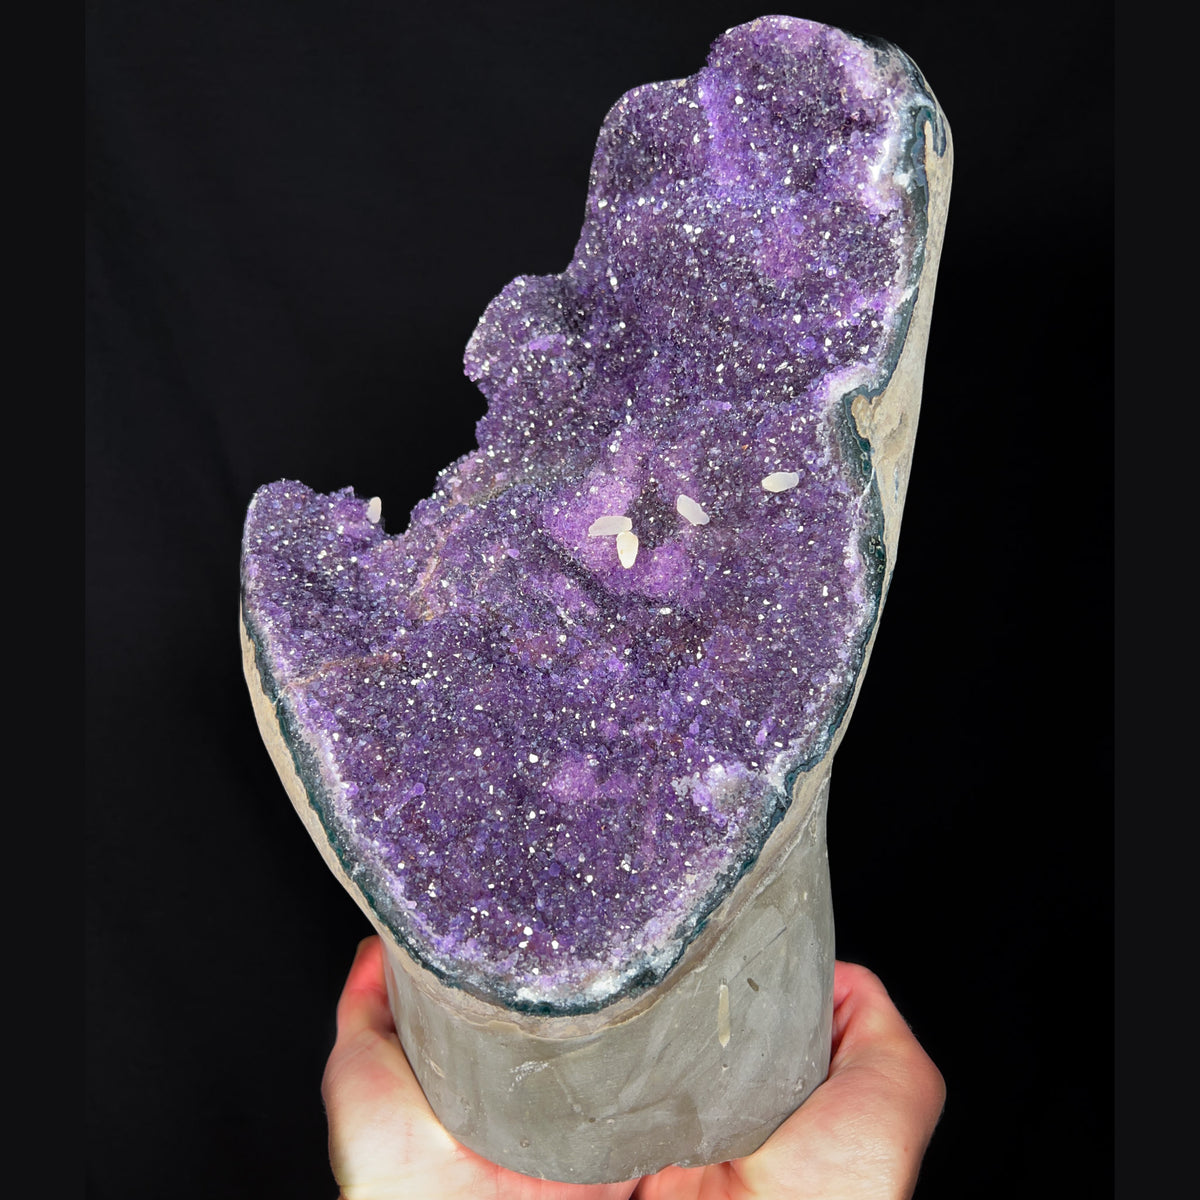 Large Purple Amethyst Crystals with Calcite in a Geode